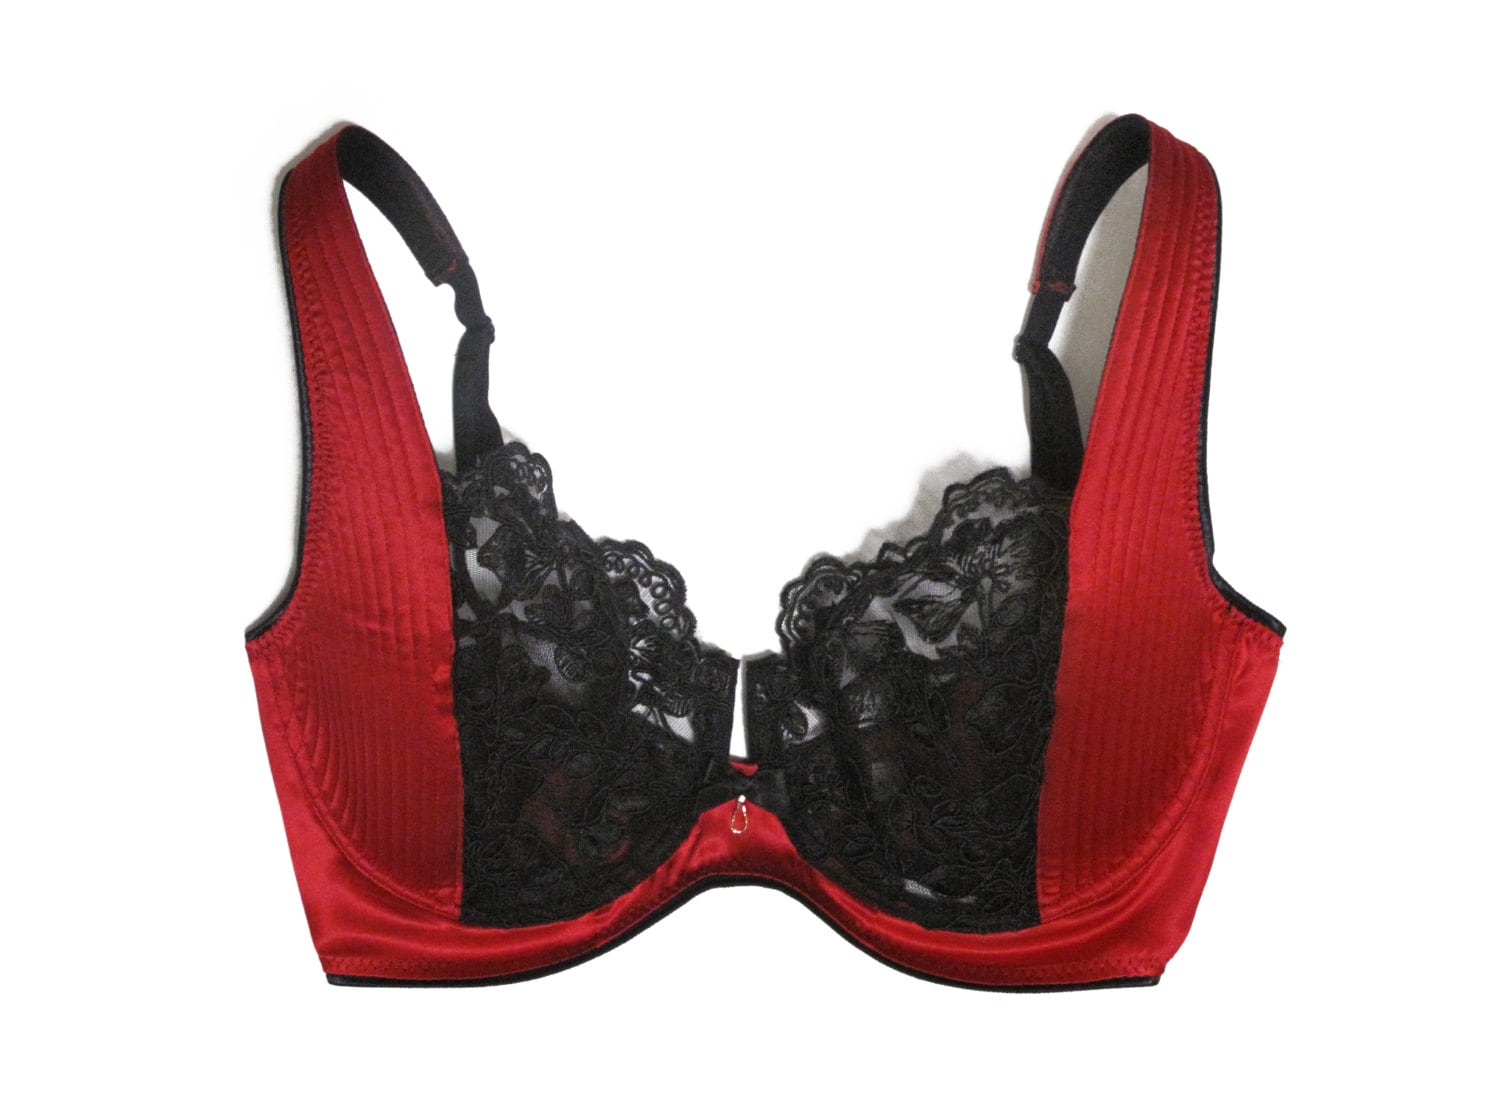 Lace Bra in Red Spandex Silk and Black Calais Lace Perfect for